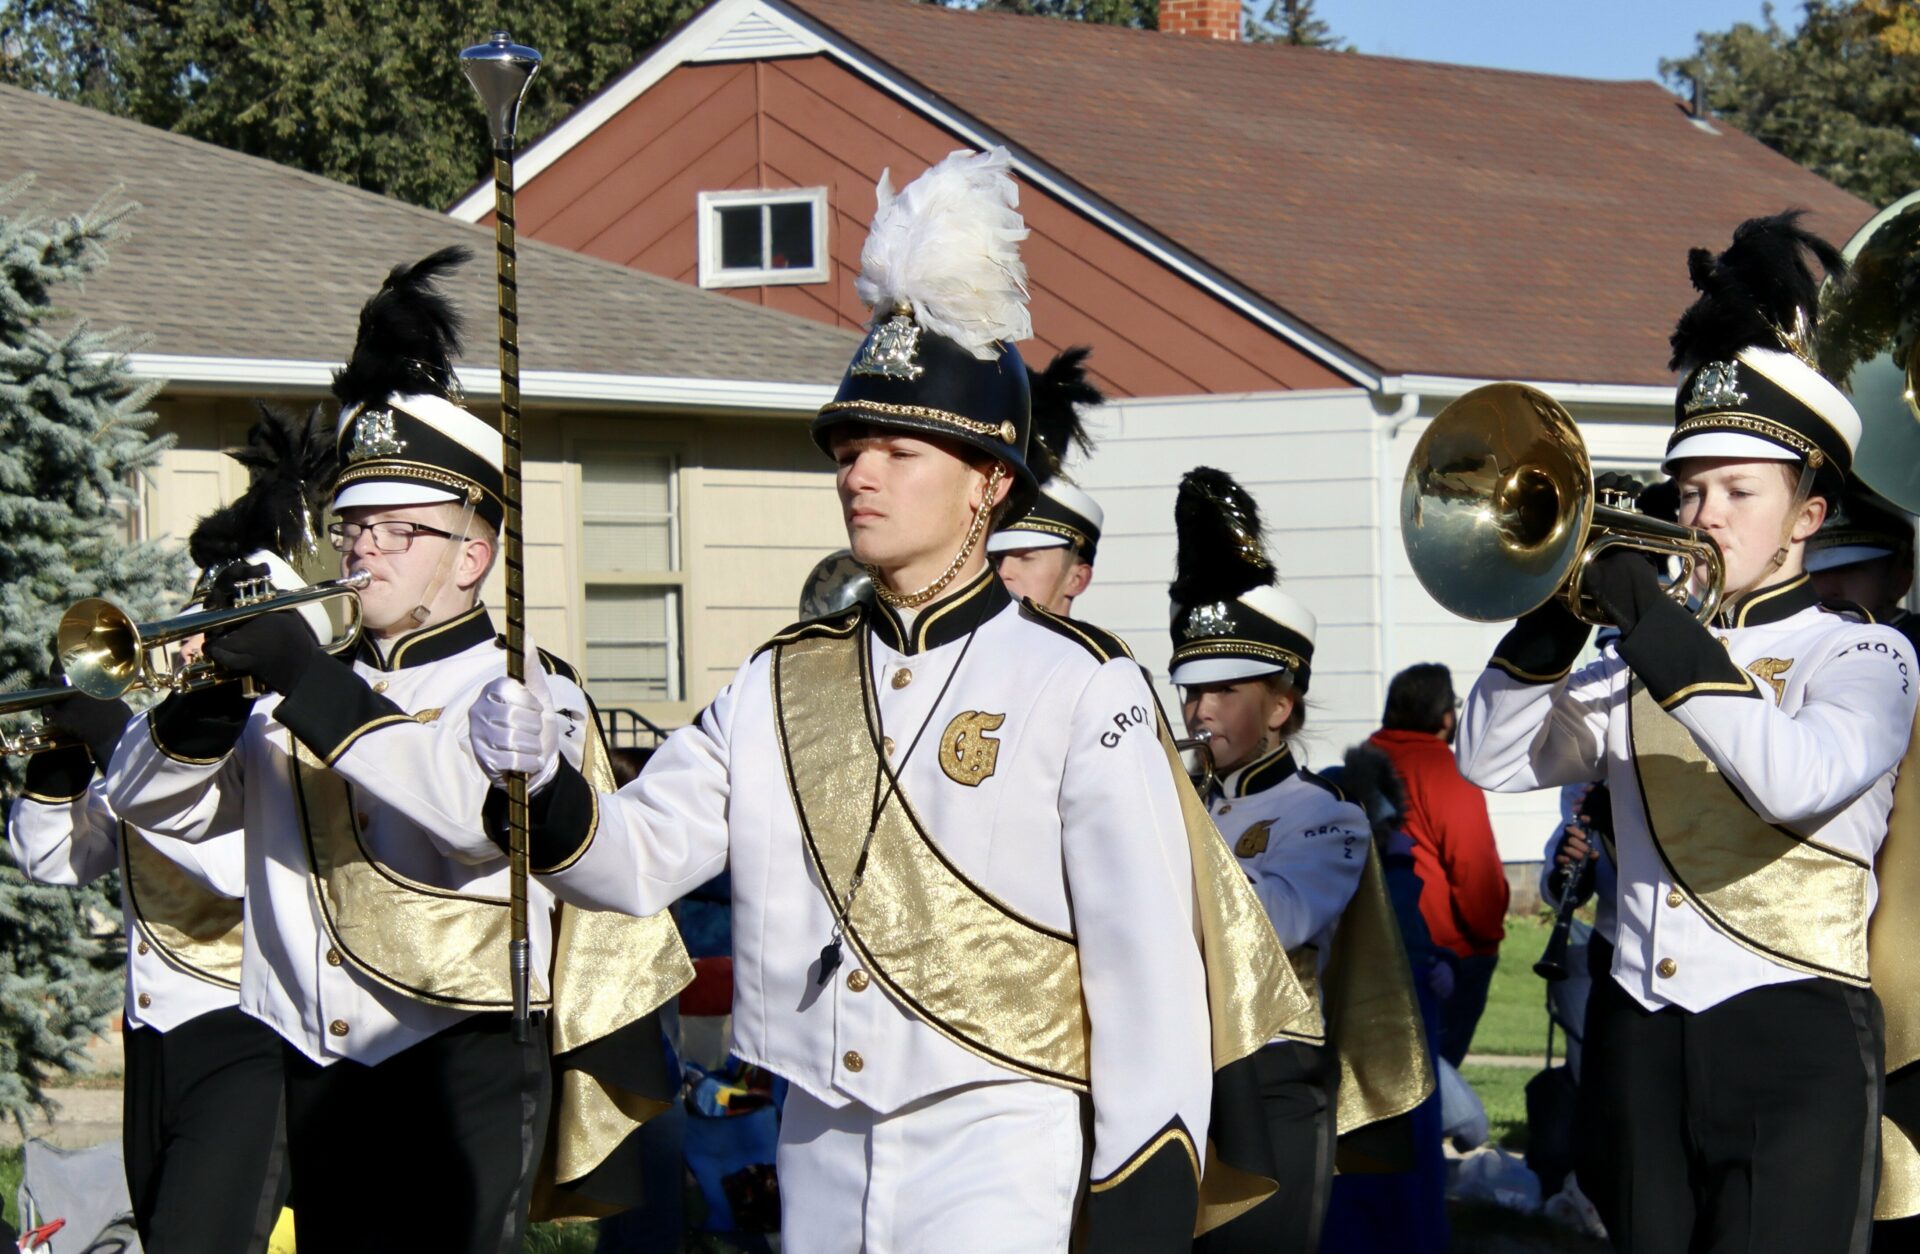 The Groton High School Marching Band was one of 129 entrants in the 2023 Northern State homecoming parade on Saturday, Oct 7. Aberdeen Insider photo by Scott Waltman